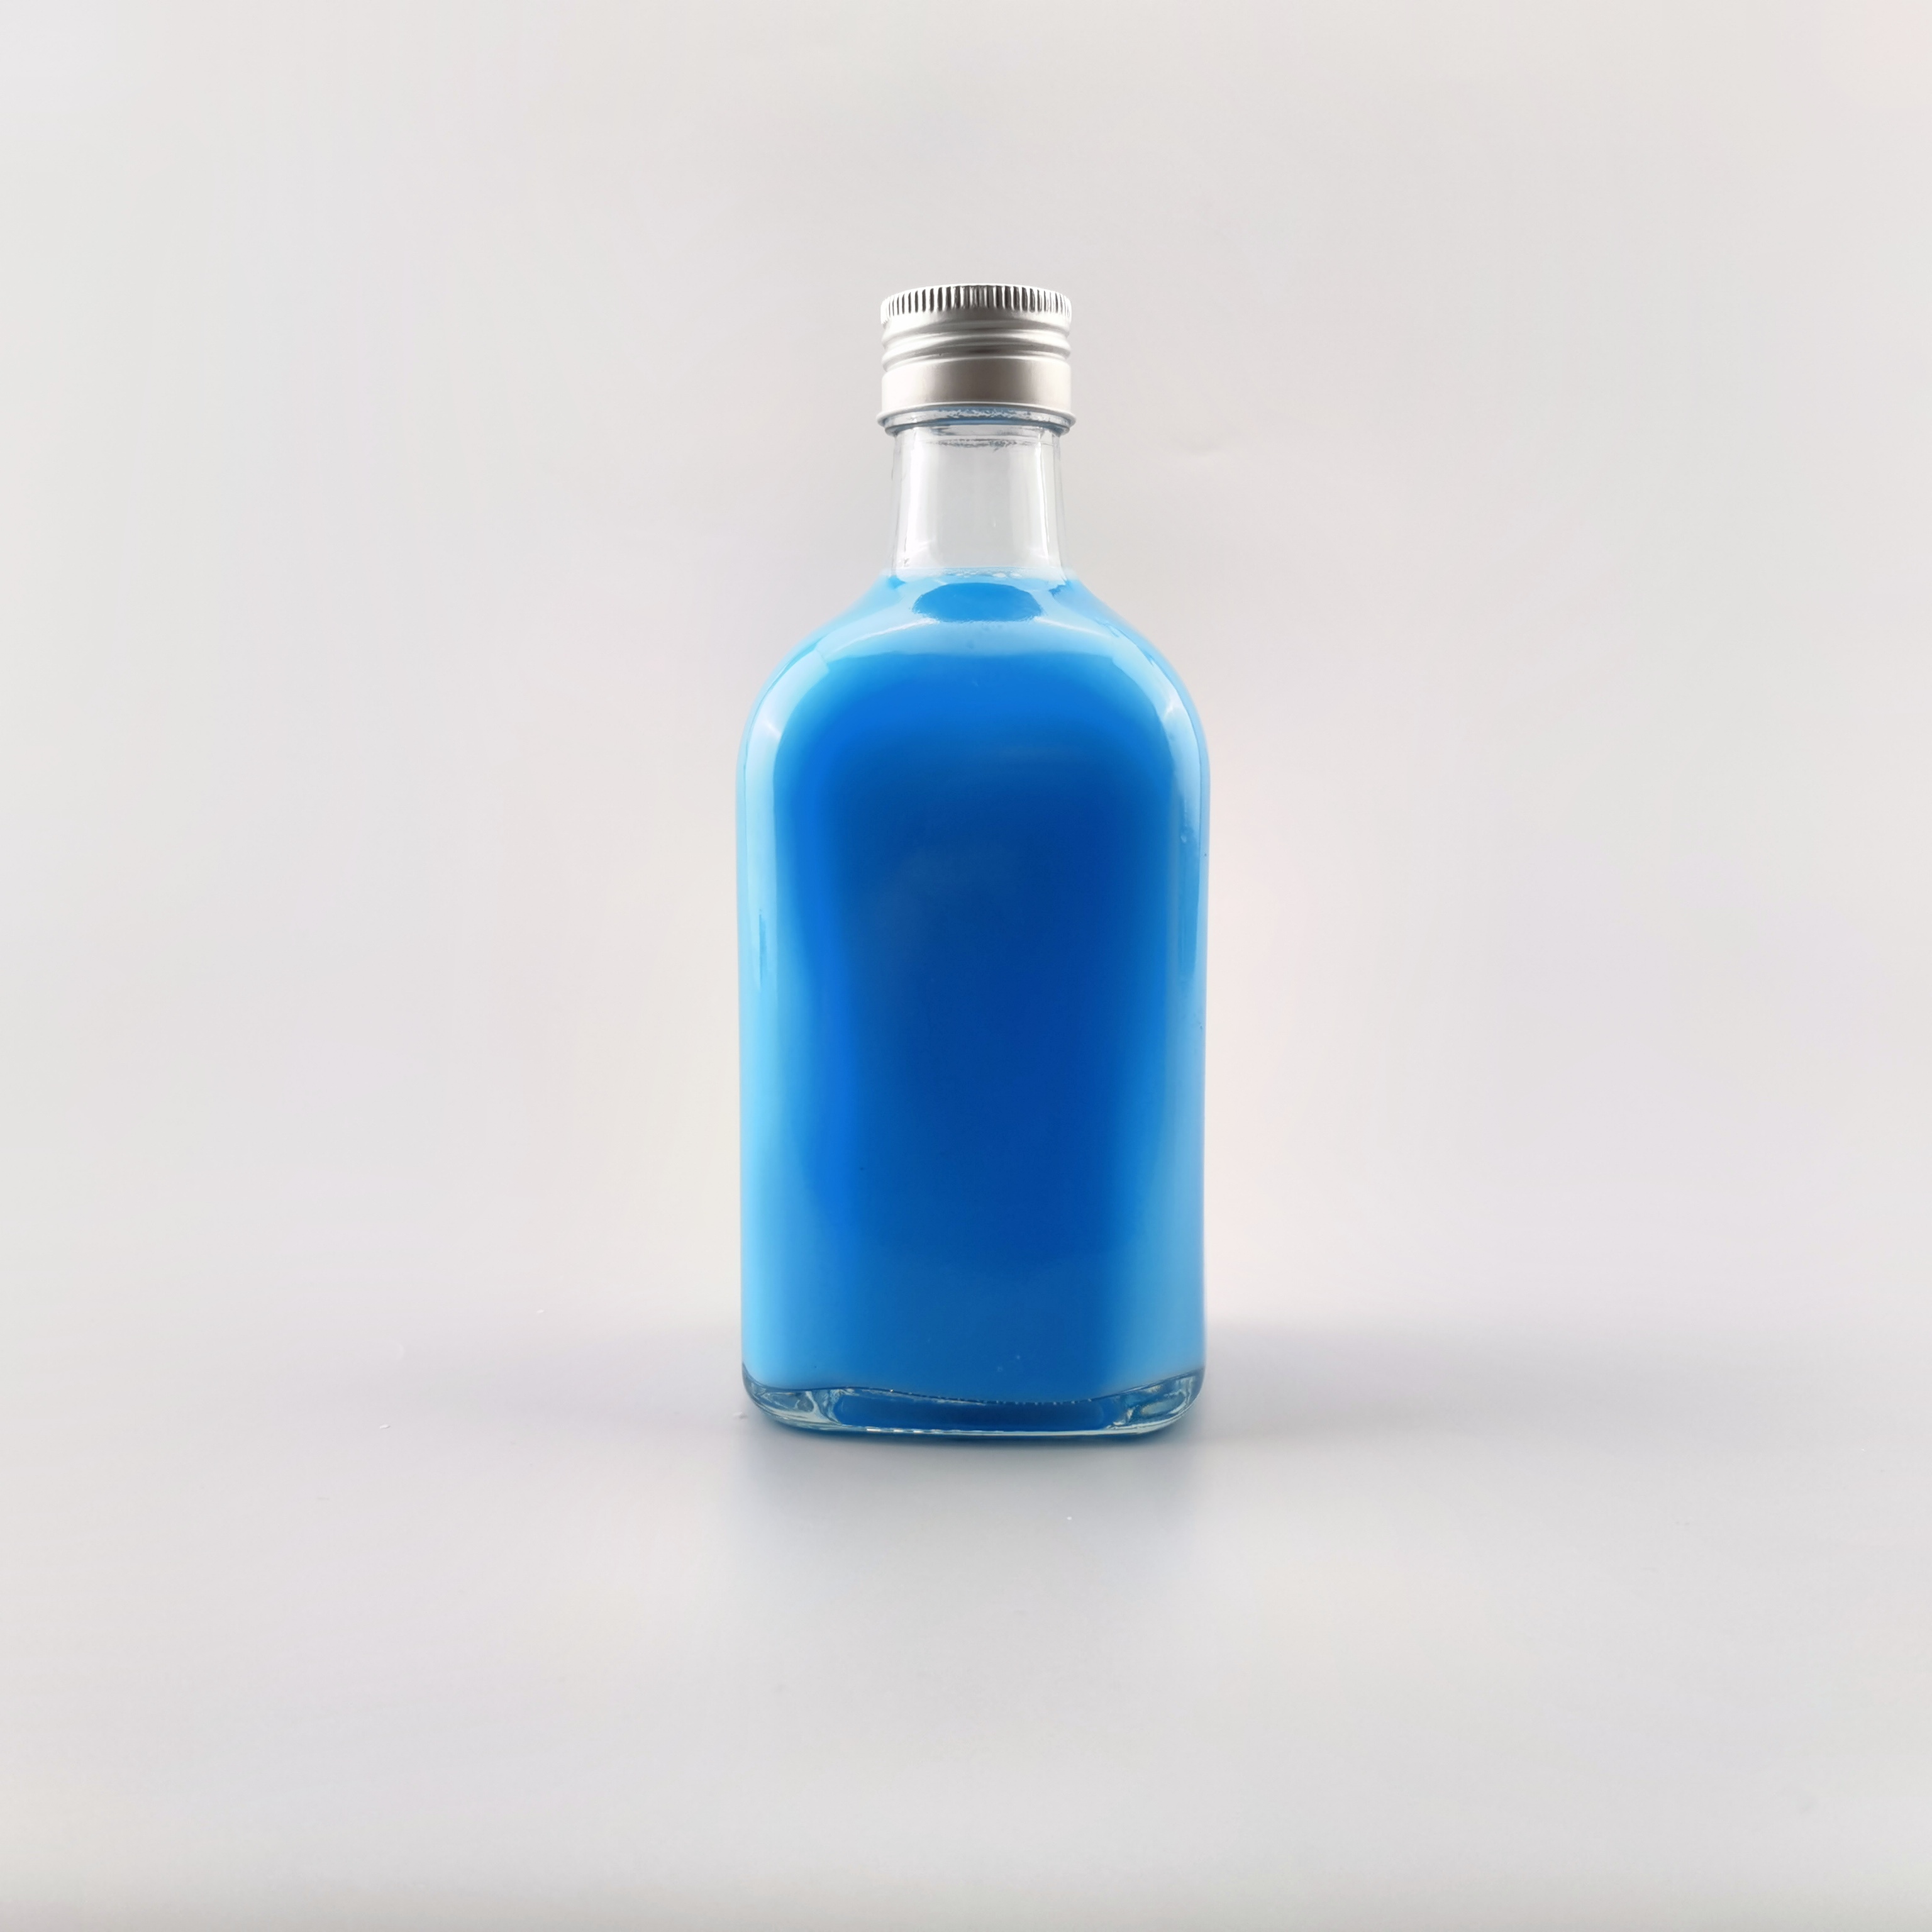 430ml Glass Drinking Bottle for Packing with Metal Cap 